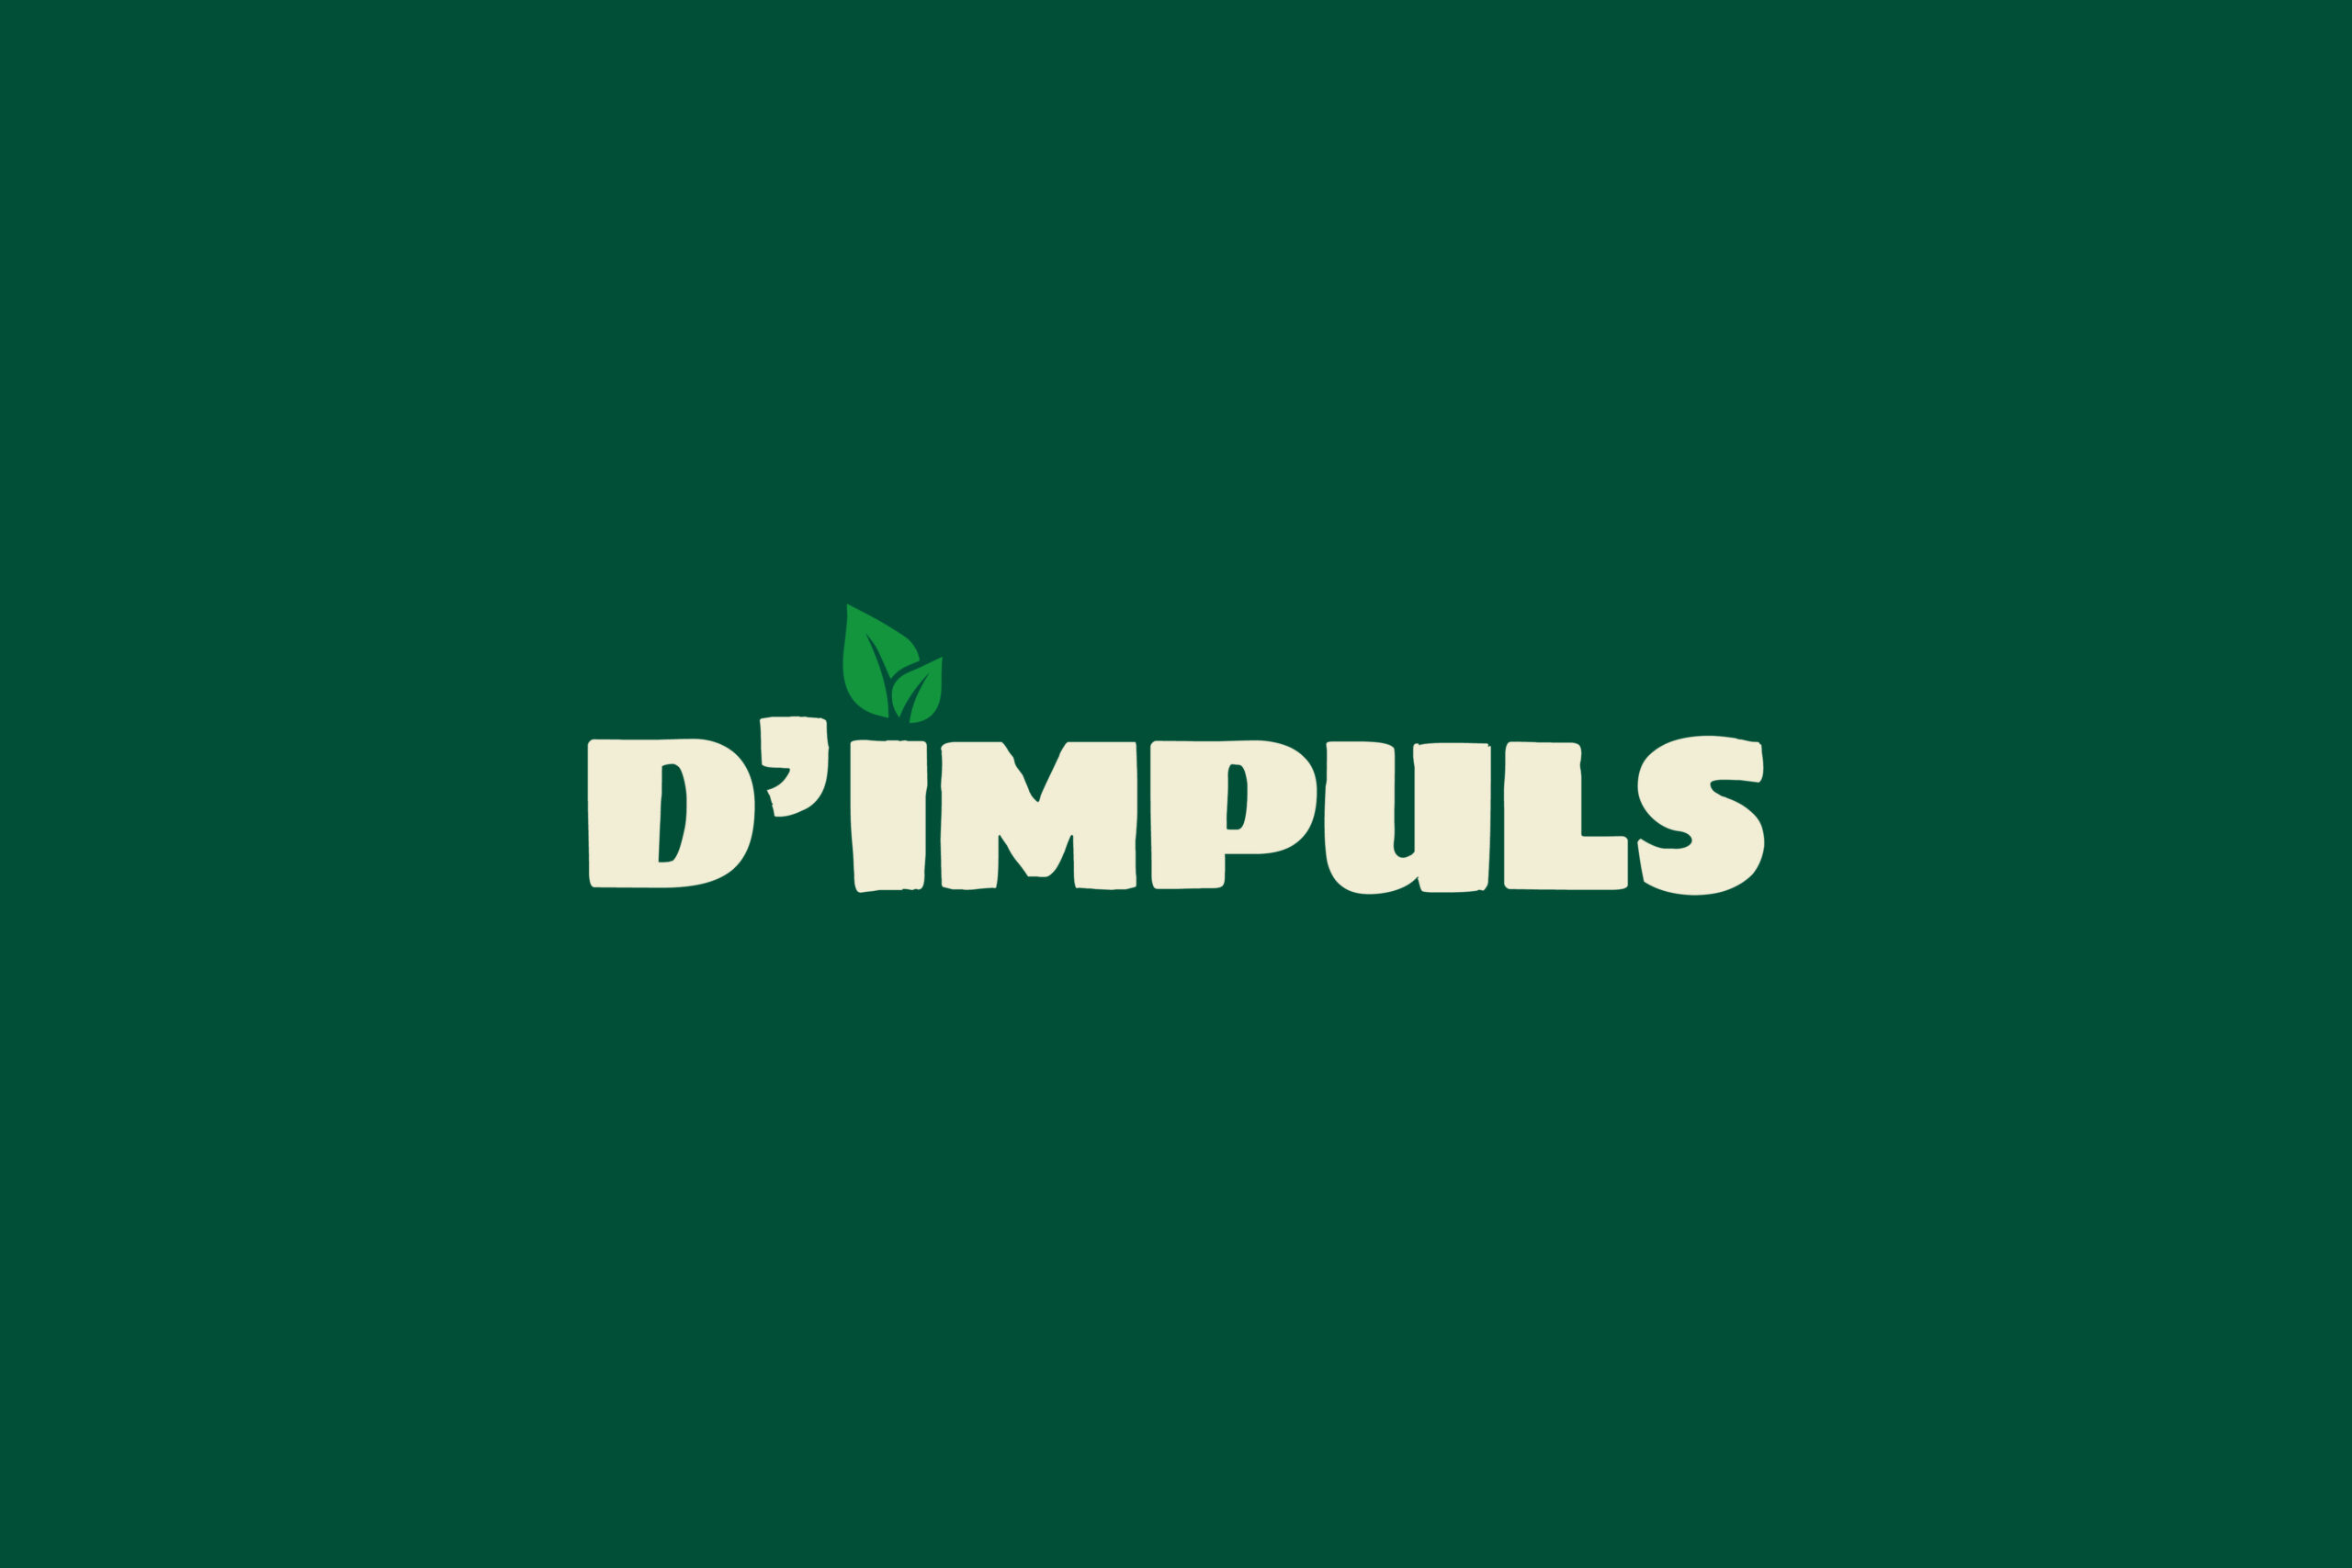 D'impuls by think and load